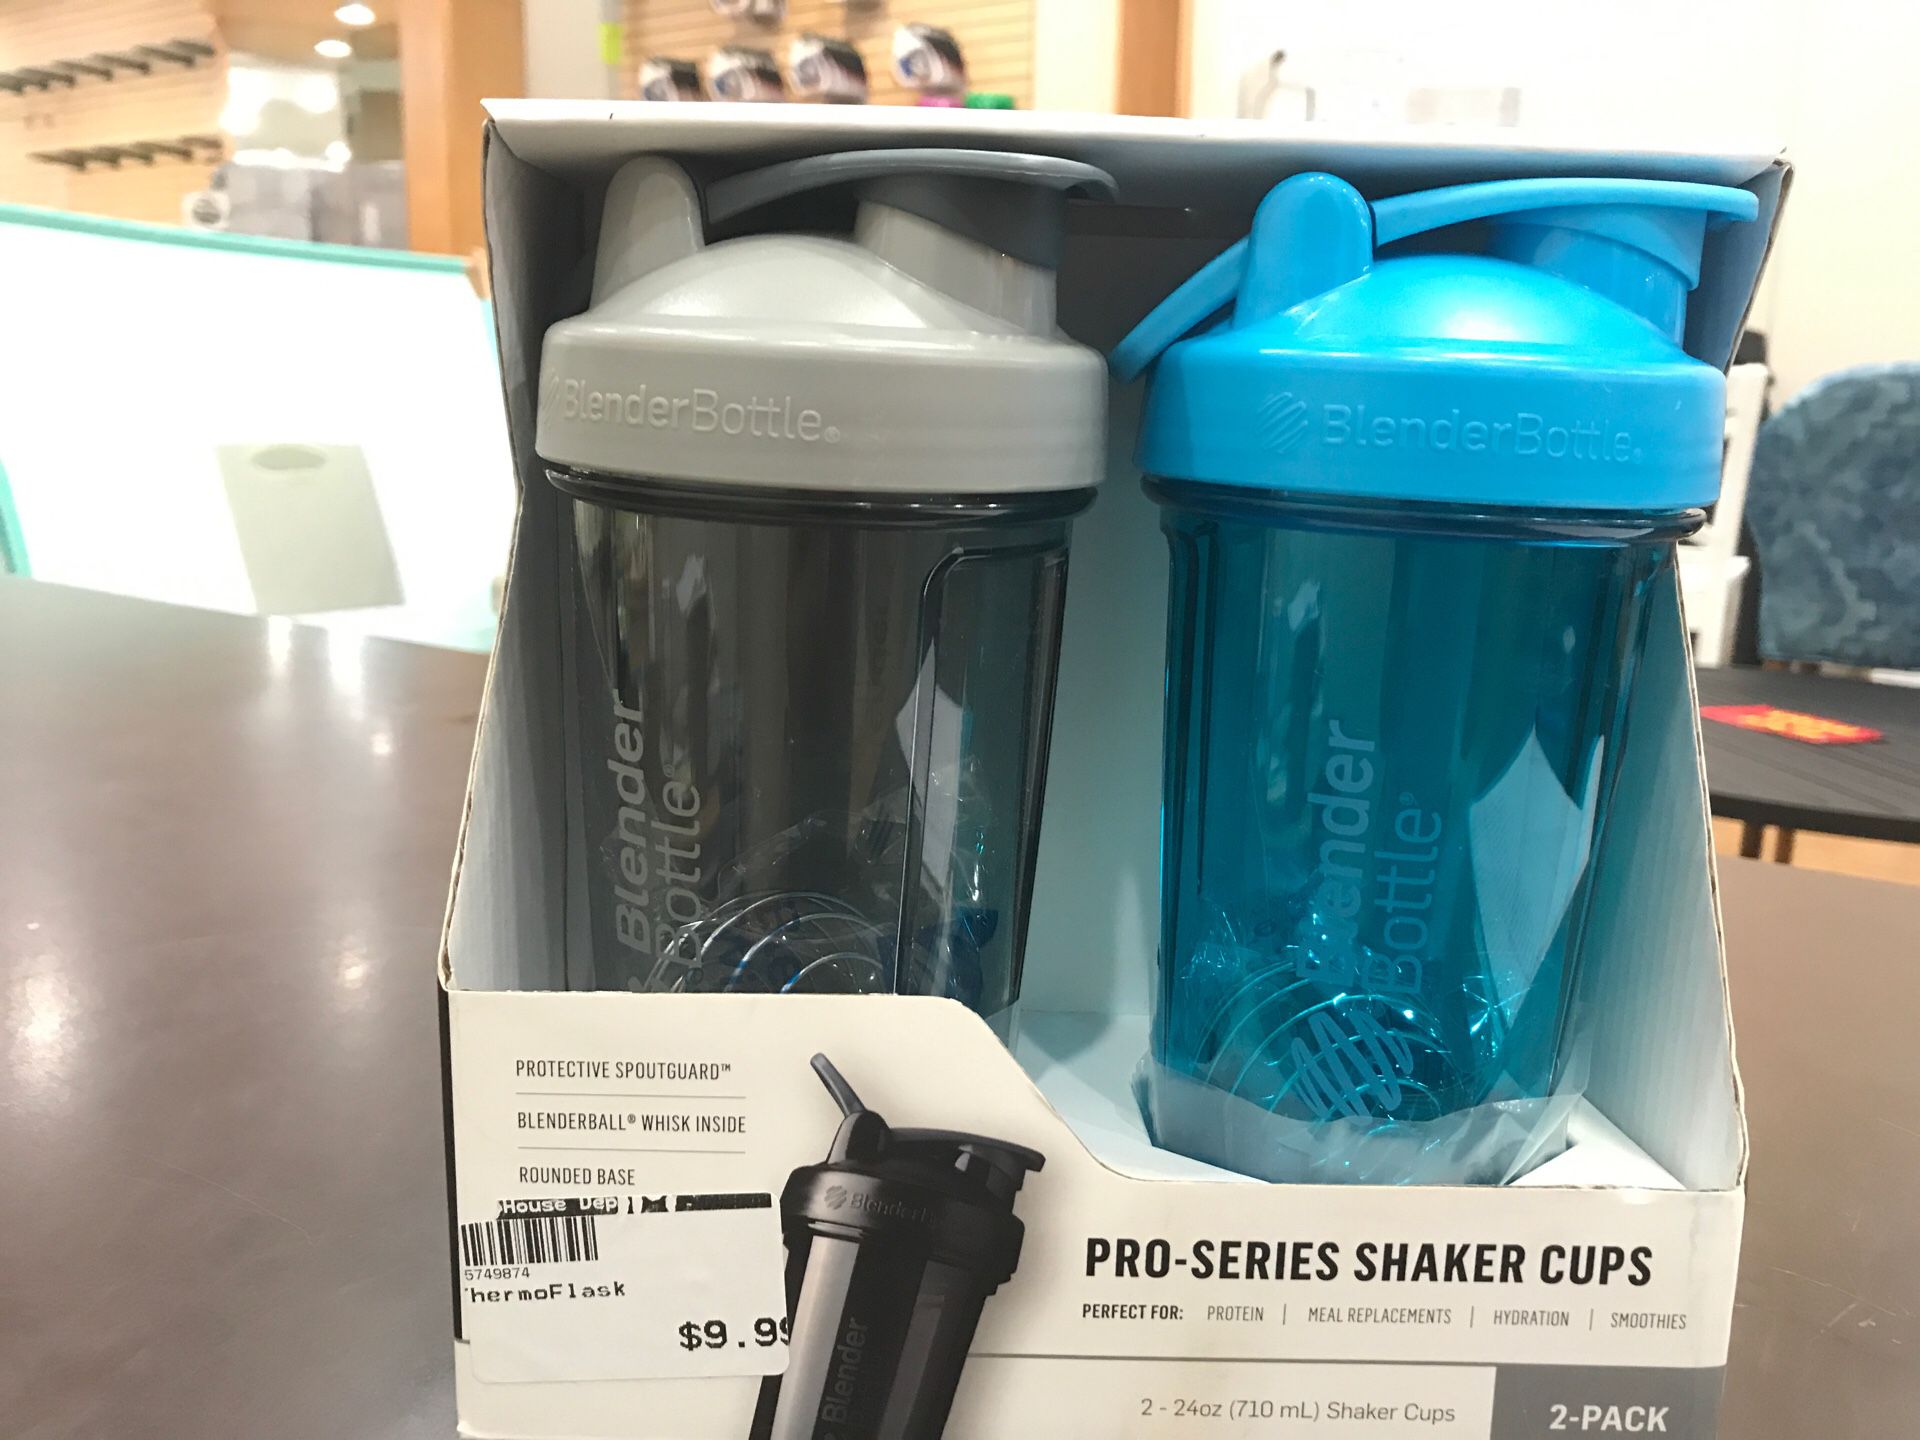 Blender bottle pro-series shaker cups for only 9.99 at The House Depot!🏡